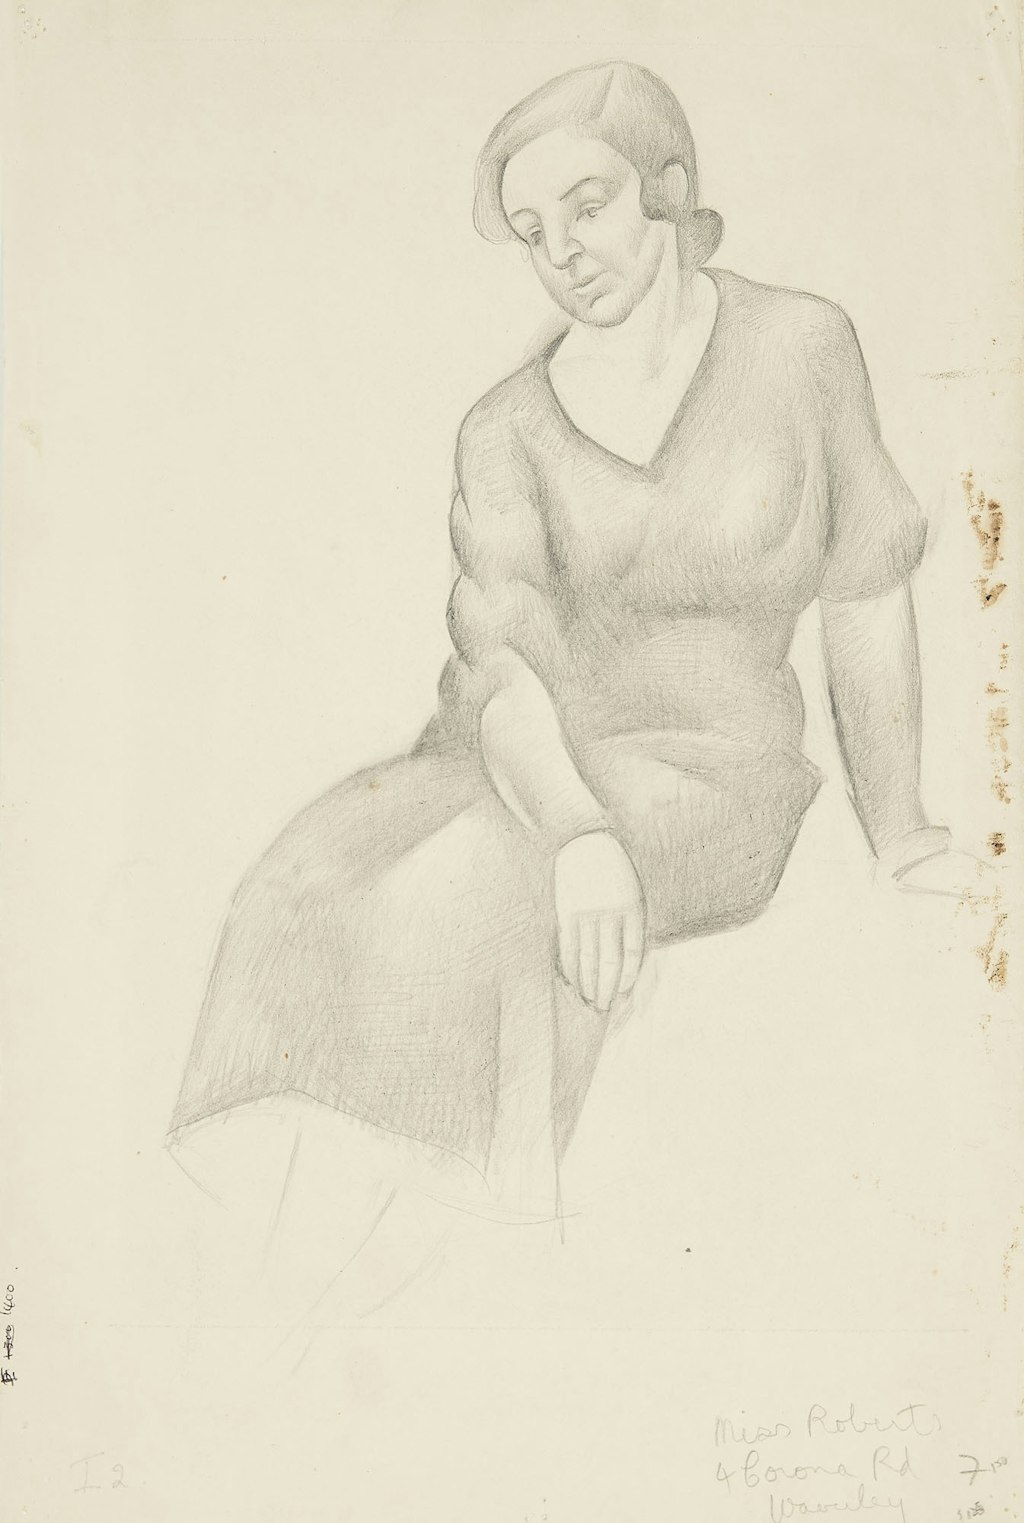 Pencil drawing of a seated woman in a dress. There are some marks and inscriptions on the paper.